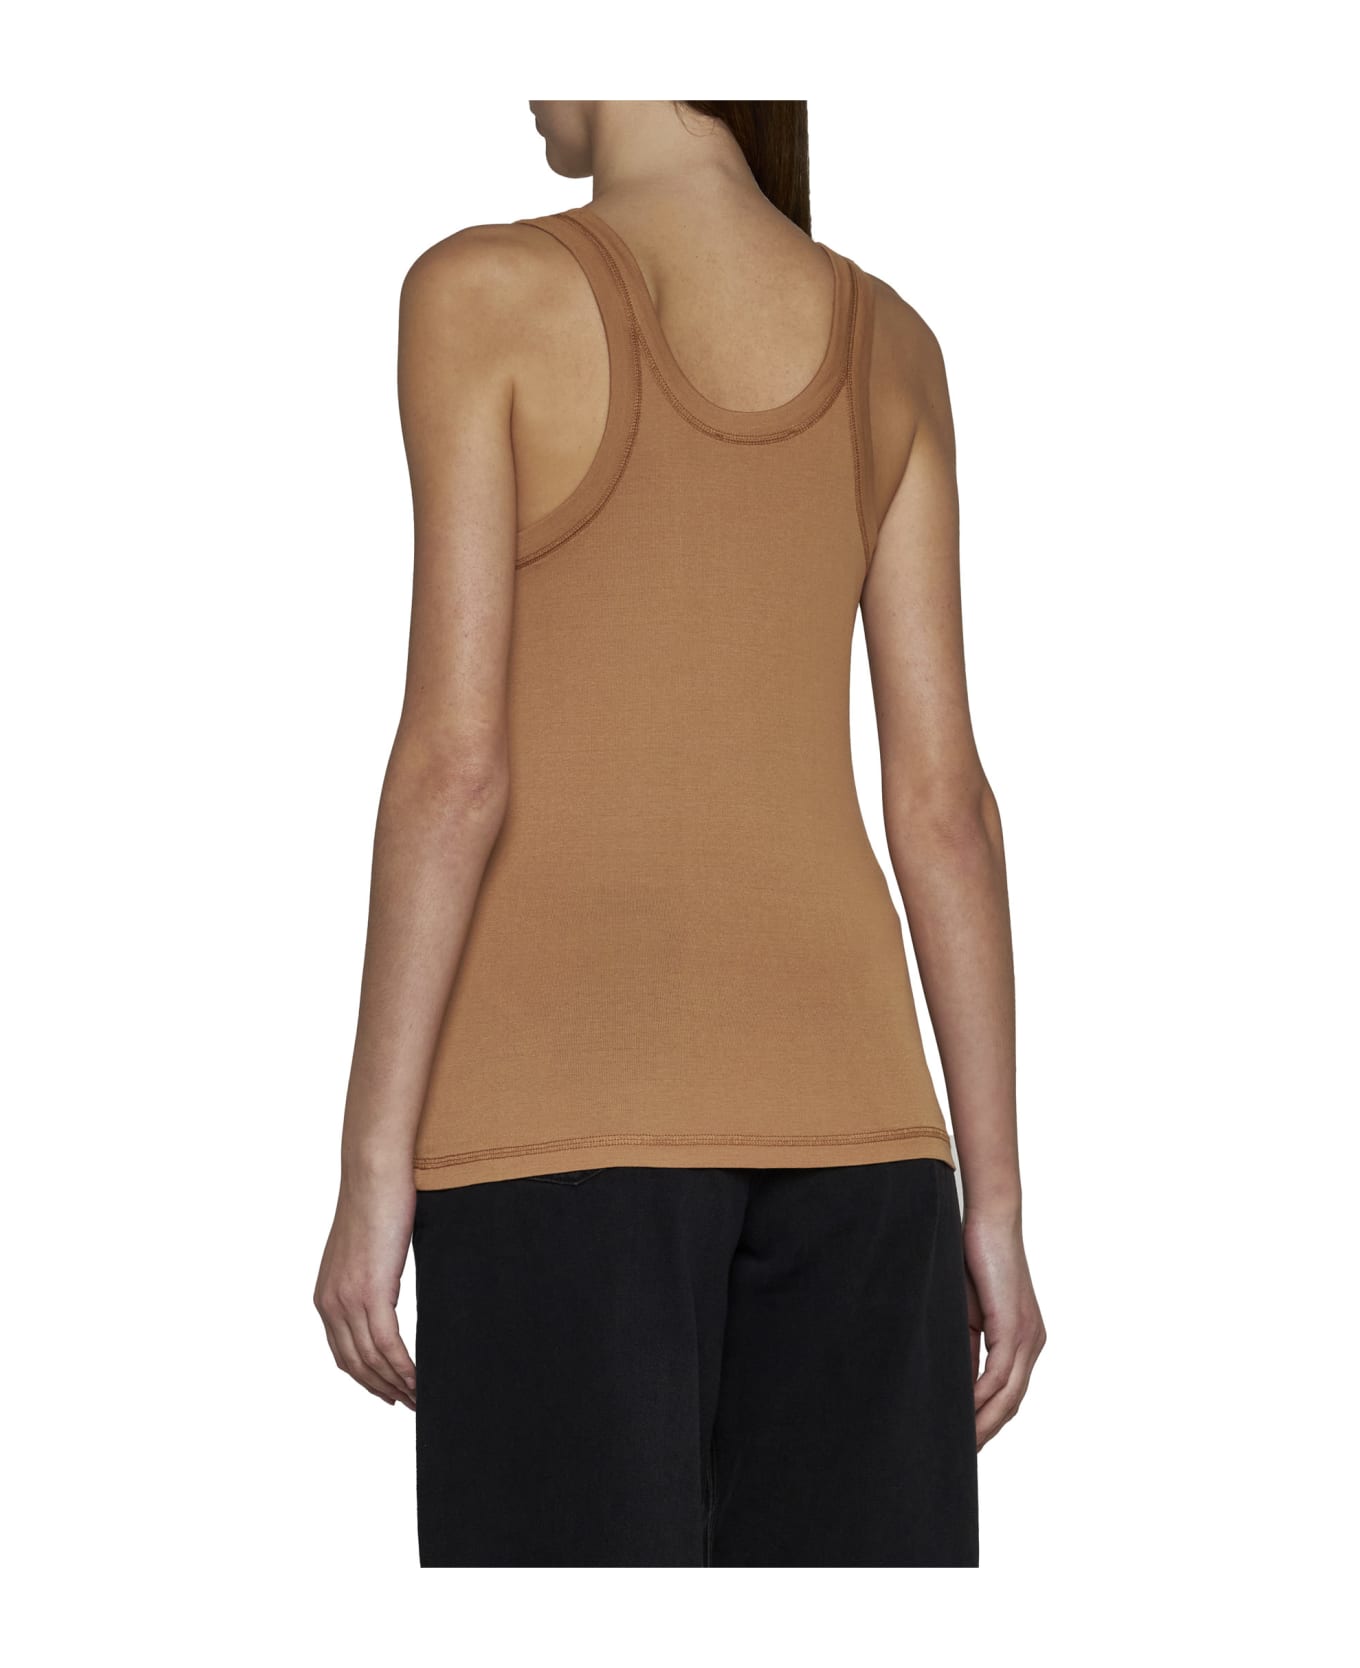 Lemaire Top - Burnt sand